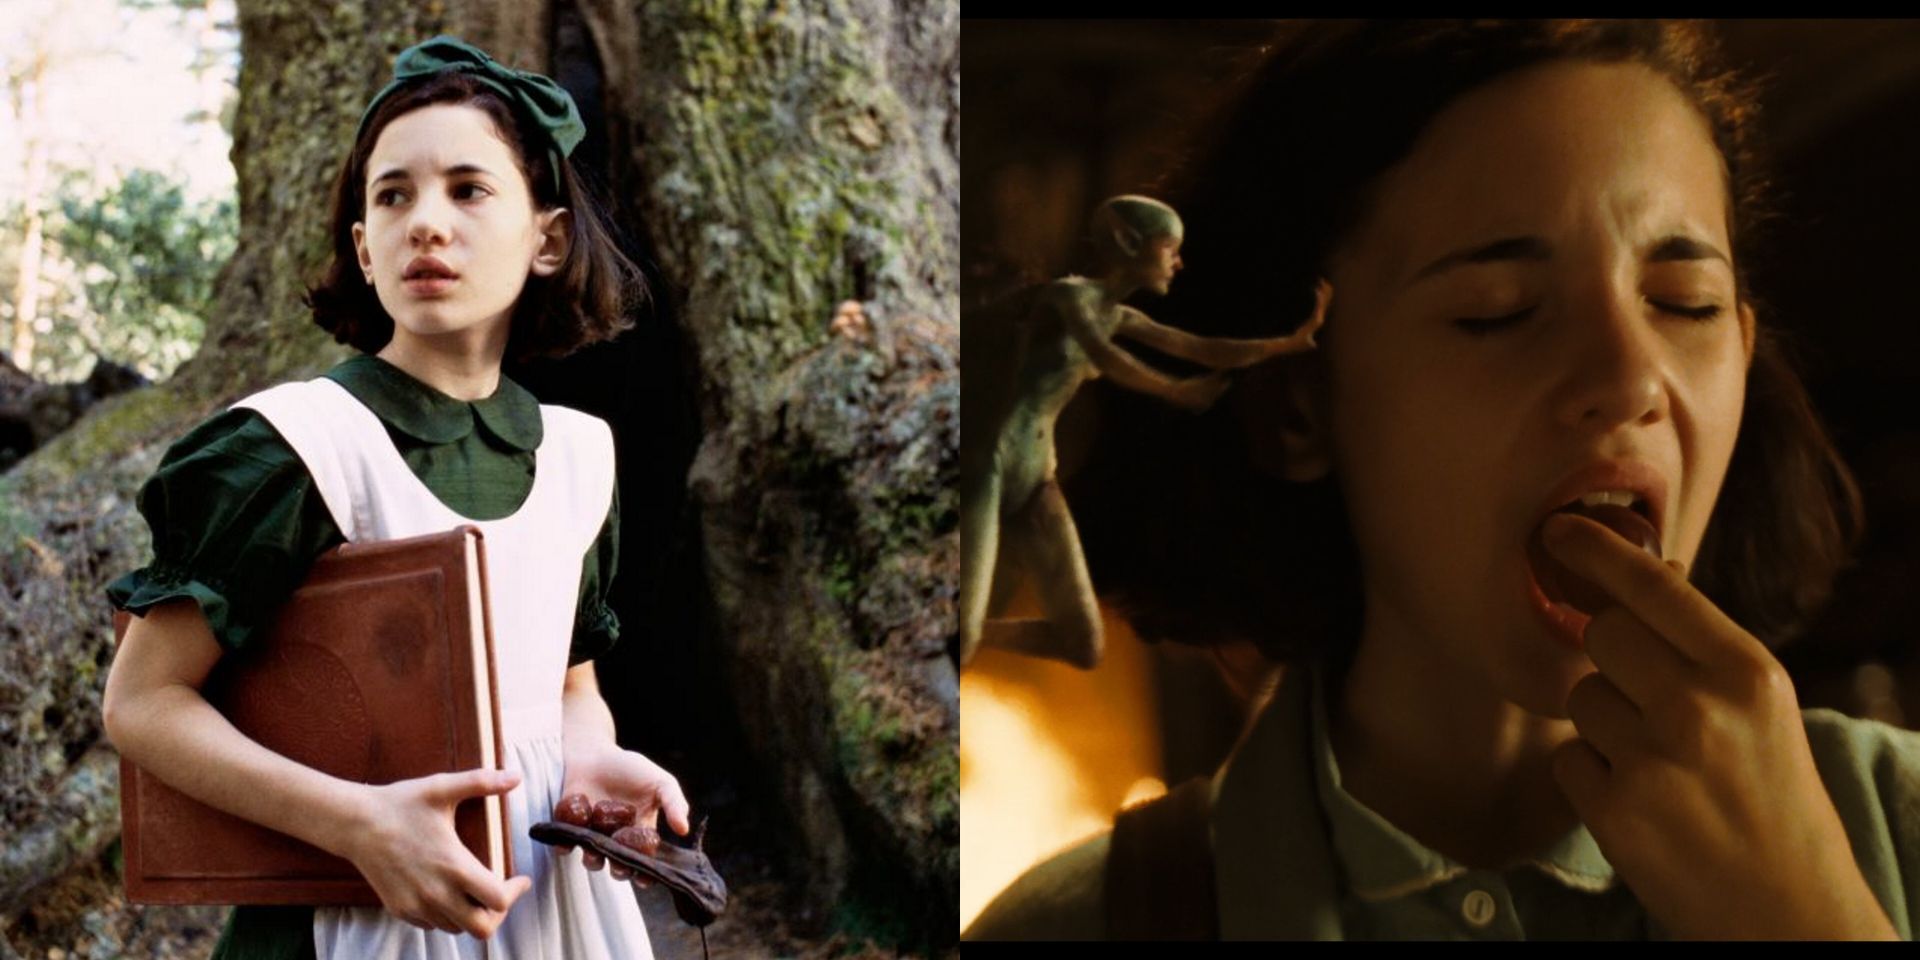 Fairy tale influences in Guillermo Del Toro's Pan's Labyrinth